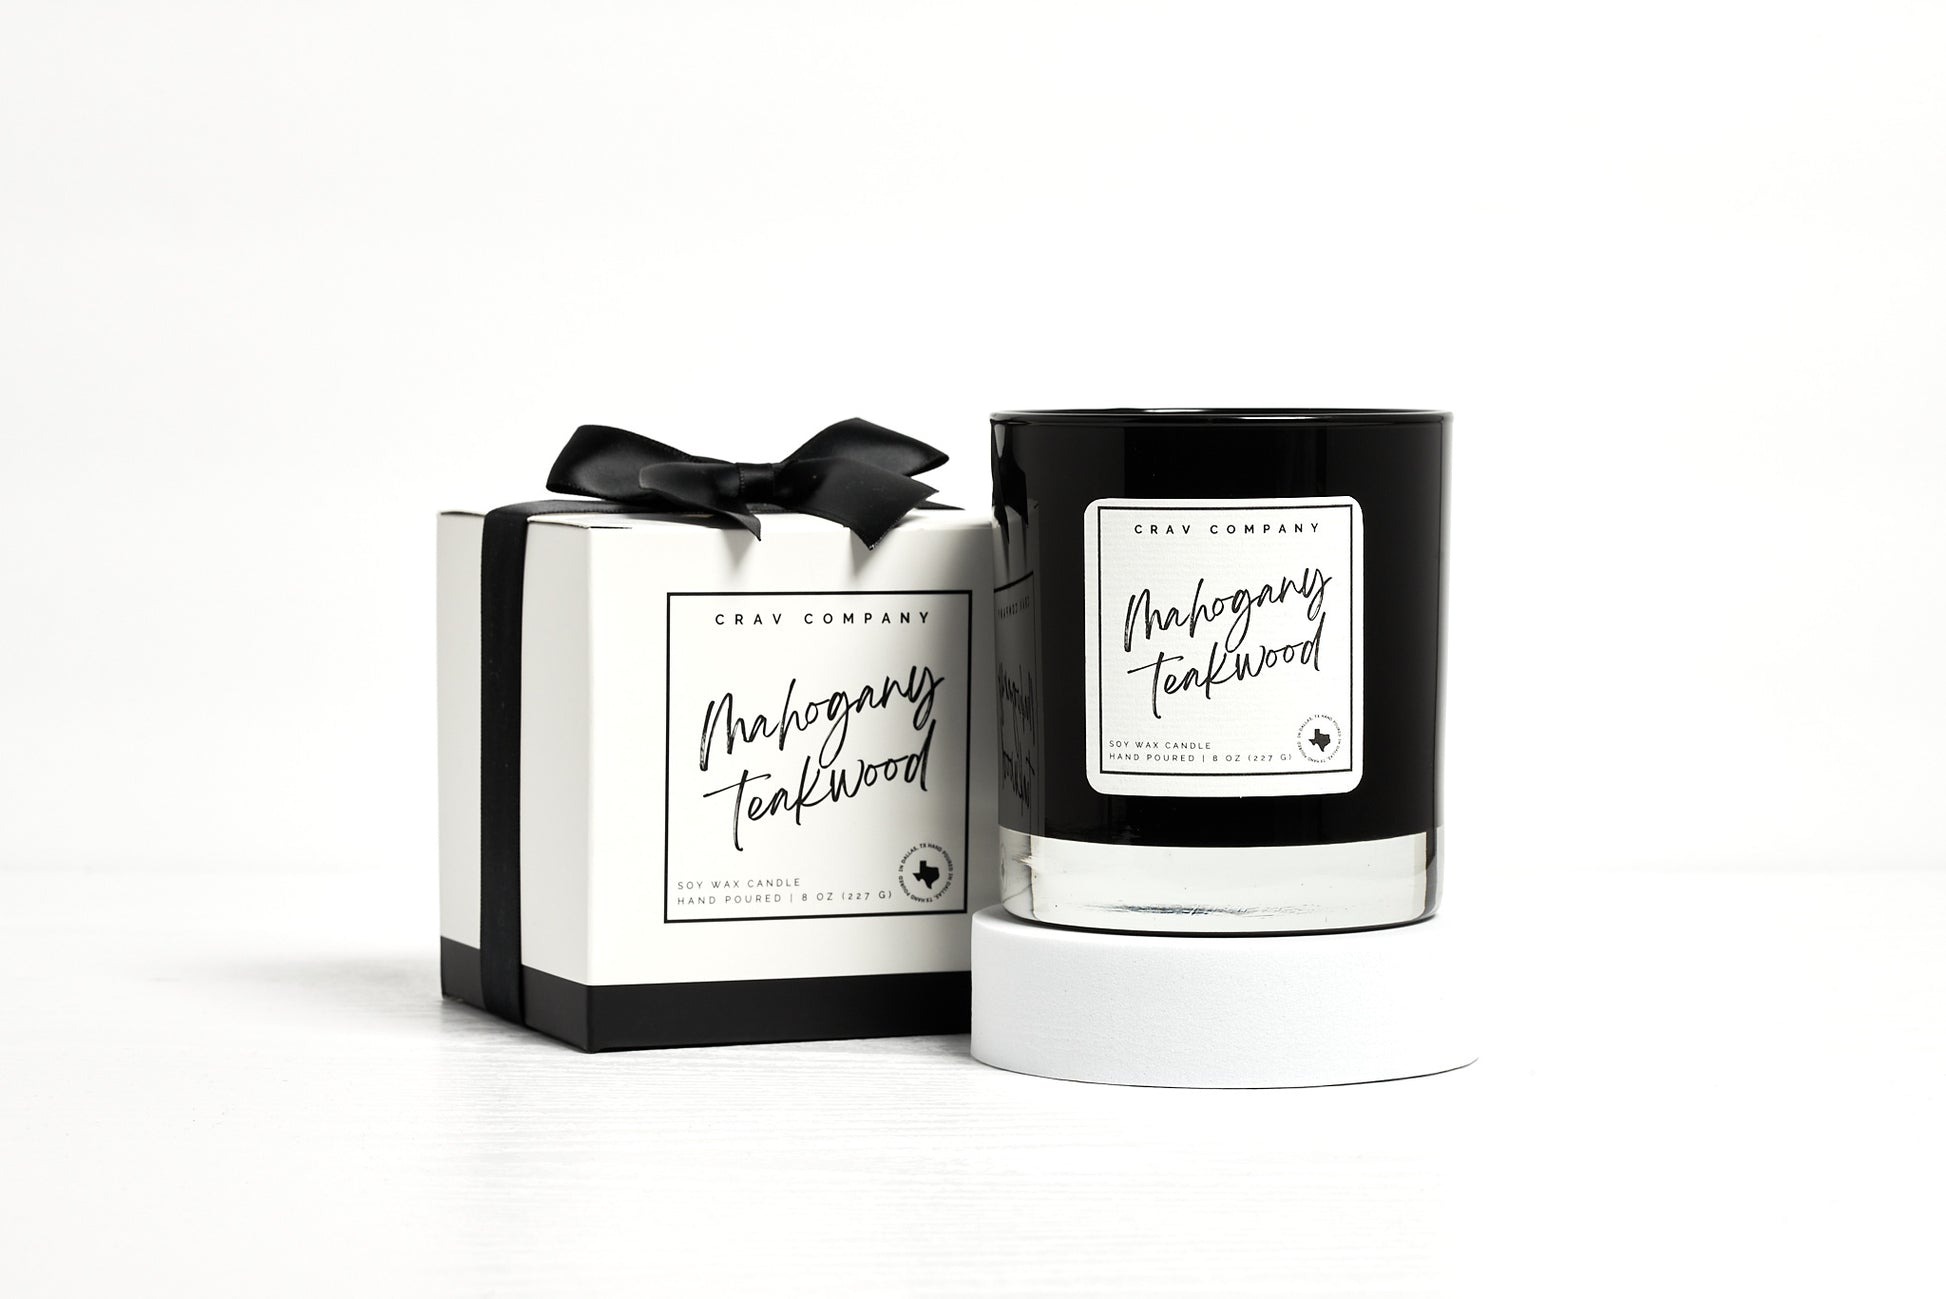 Mahogany Teakwood Room and Car Spray – Just Scents Candle Co